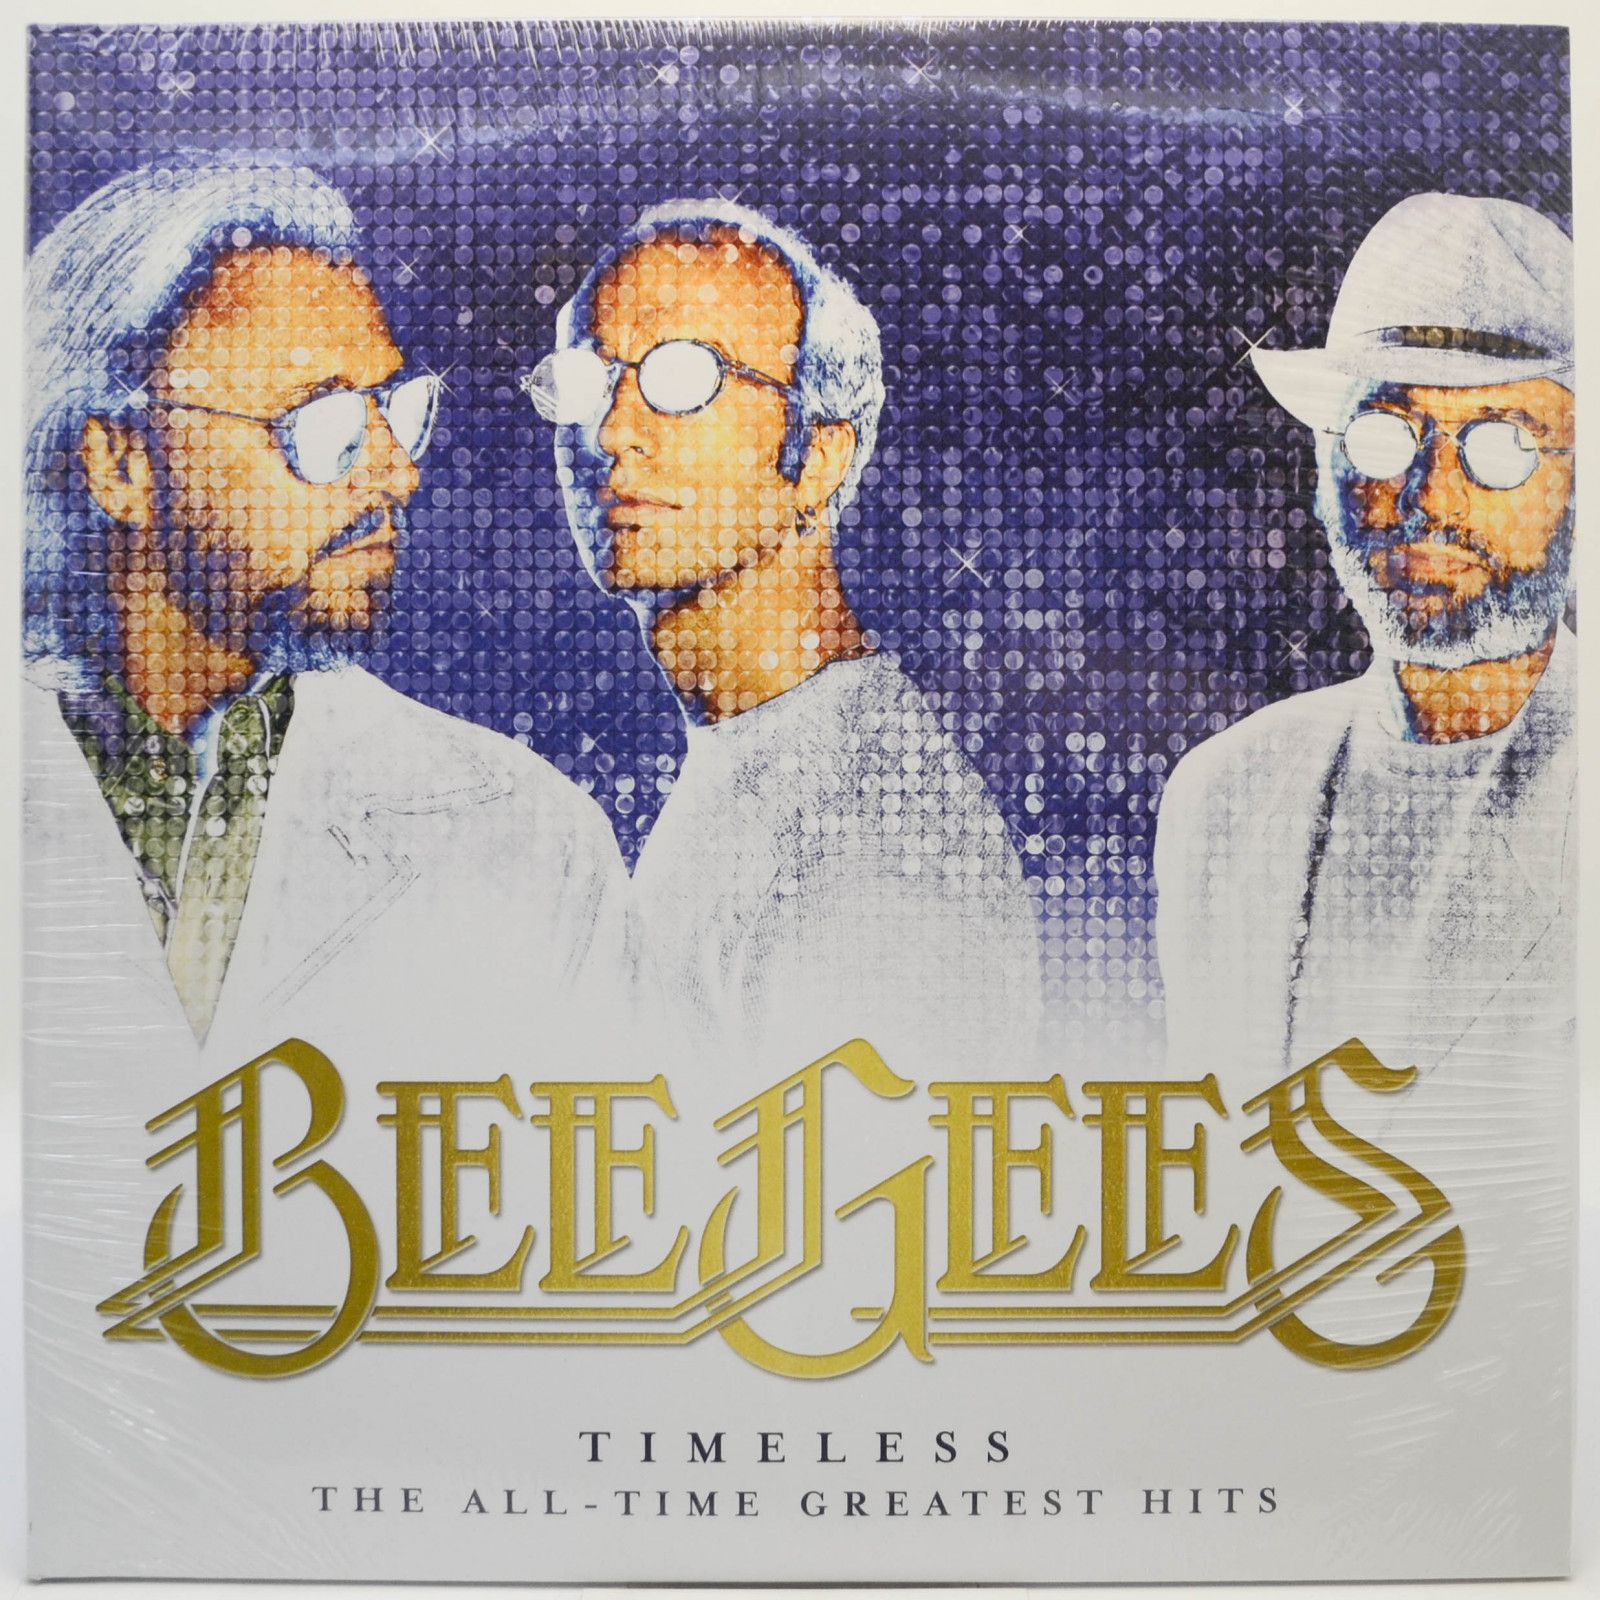 Bee Gees — Timeless - The All-Time Greatest Hits (2LP), 2017